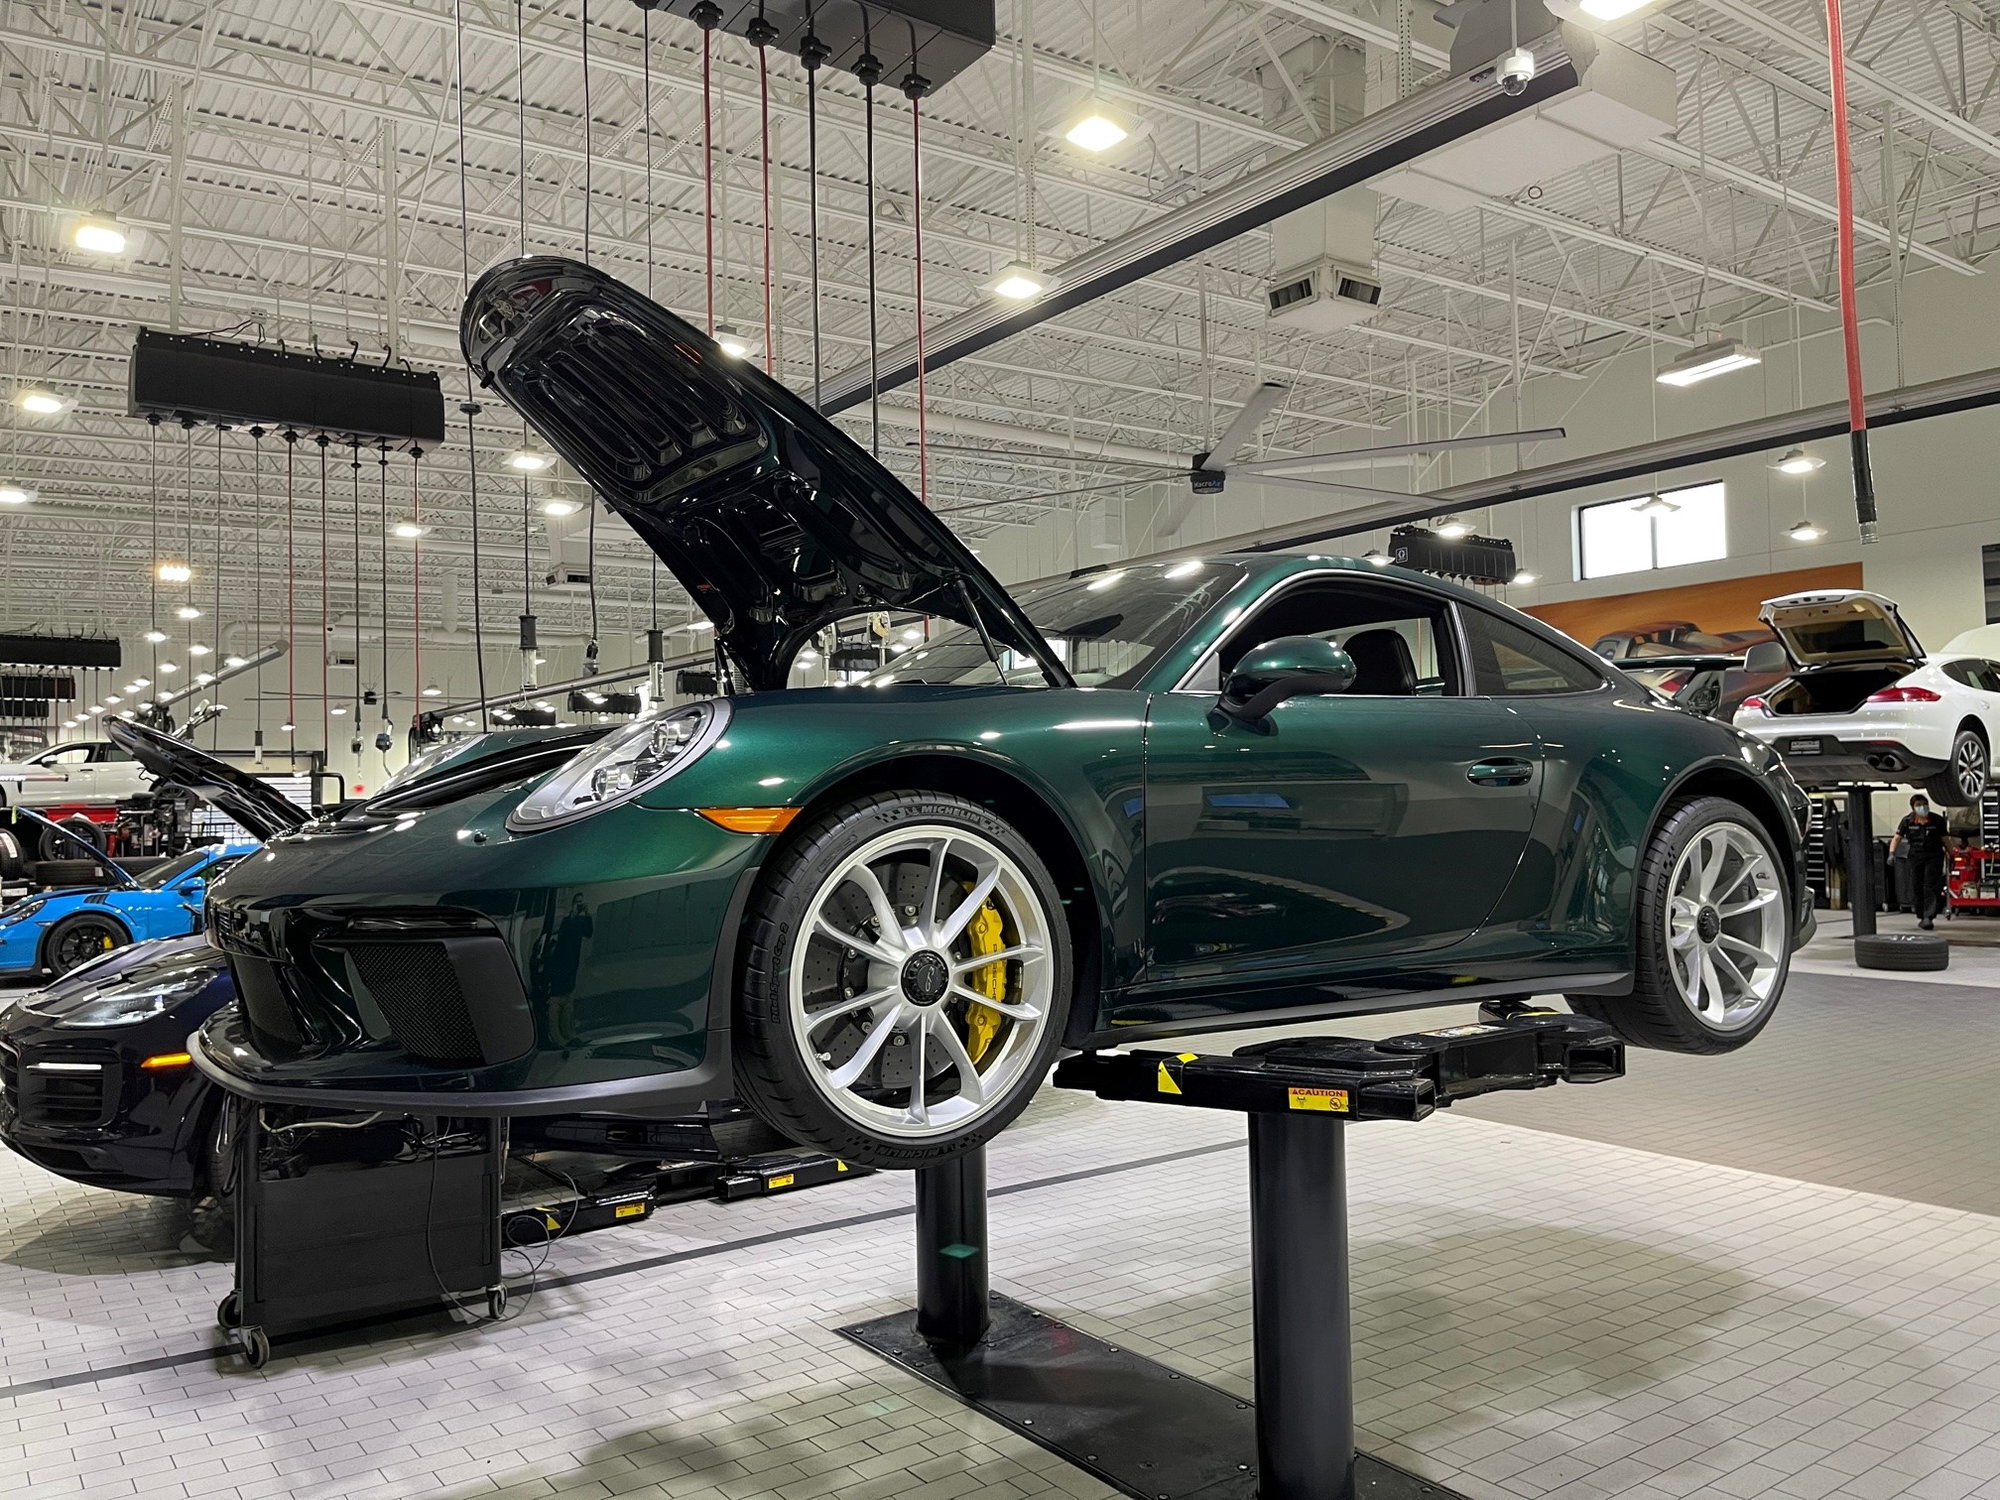 2018 Porsche GT3 - PTS Jet Green Metallic 2018 GT3 MT - Used - VIN WP0AC2A91JS176145 - 6,790 Miles - 6 cyl - 2WD - Manual - Coupe - Houston, TX 77090, United States